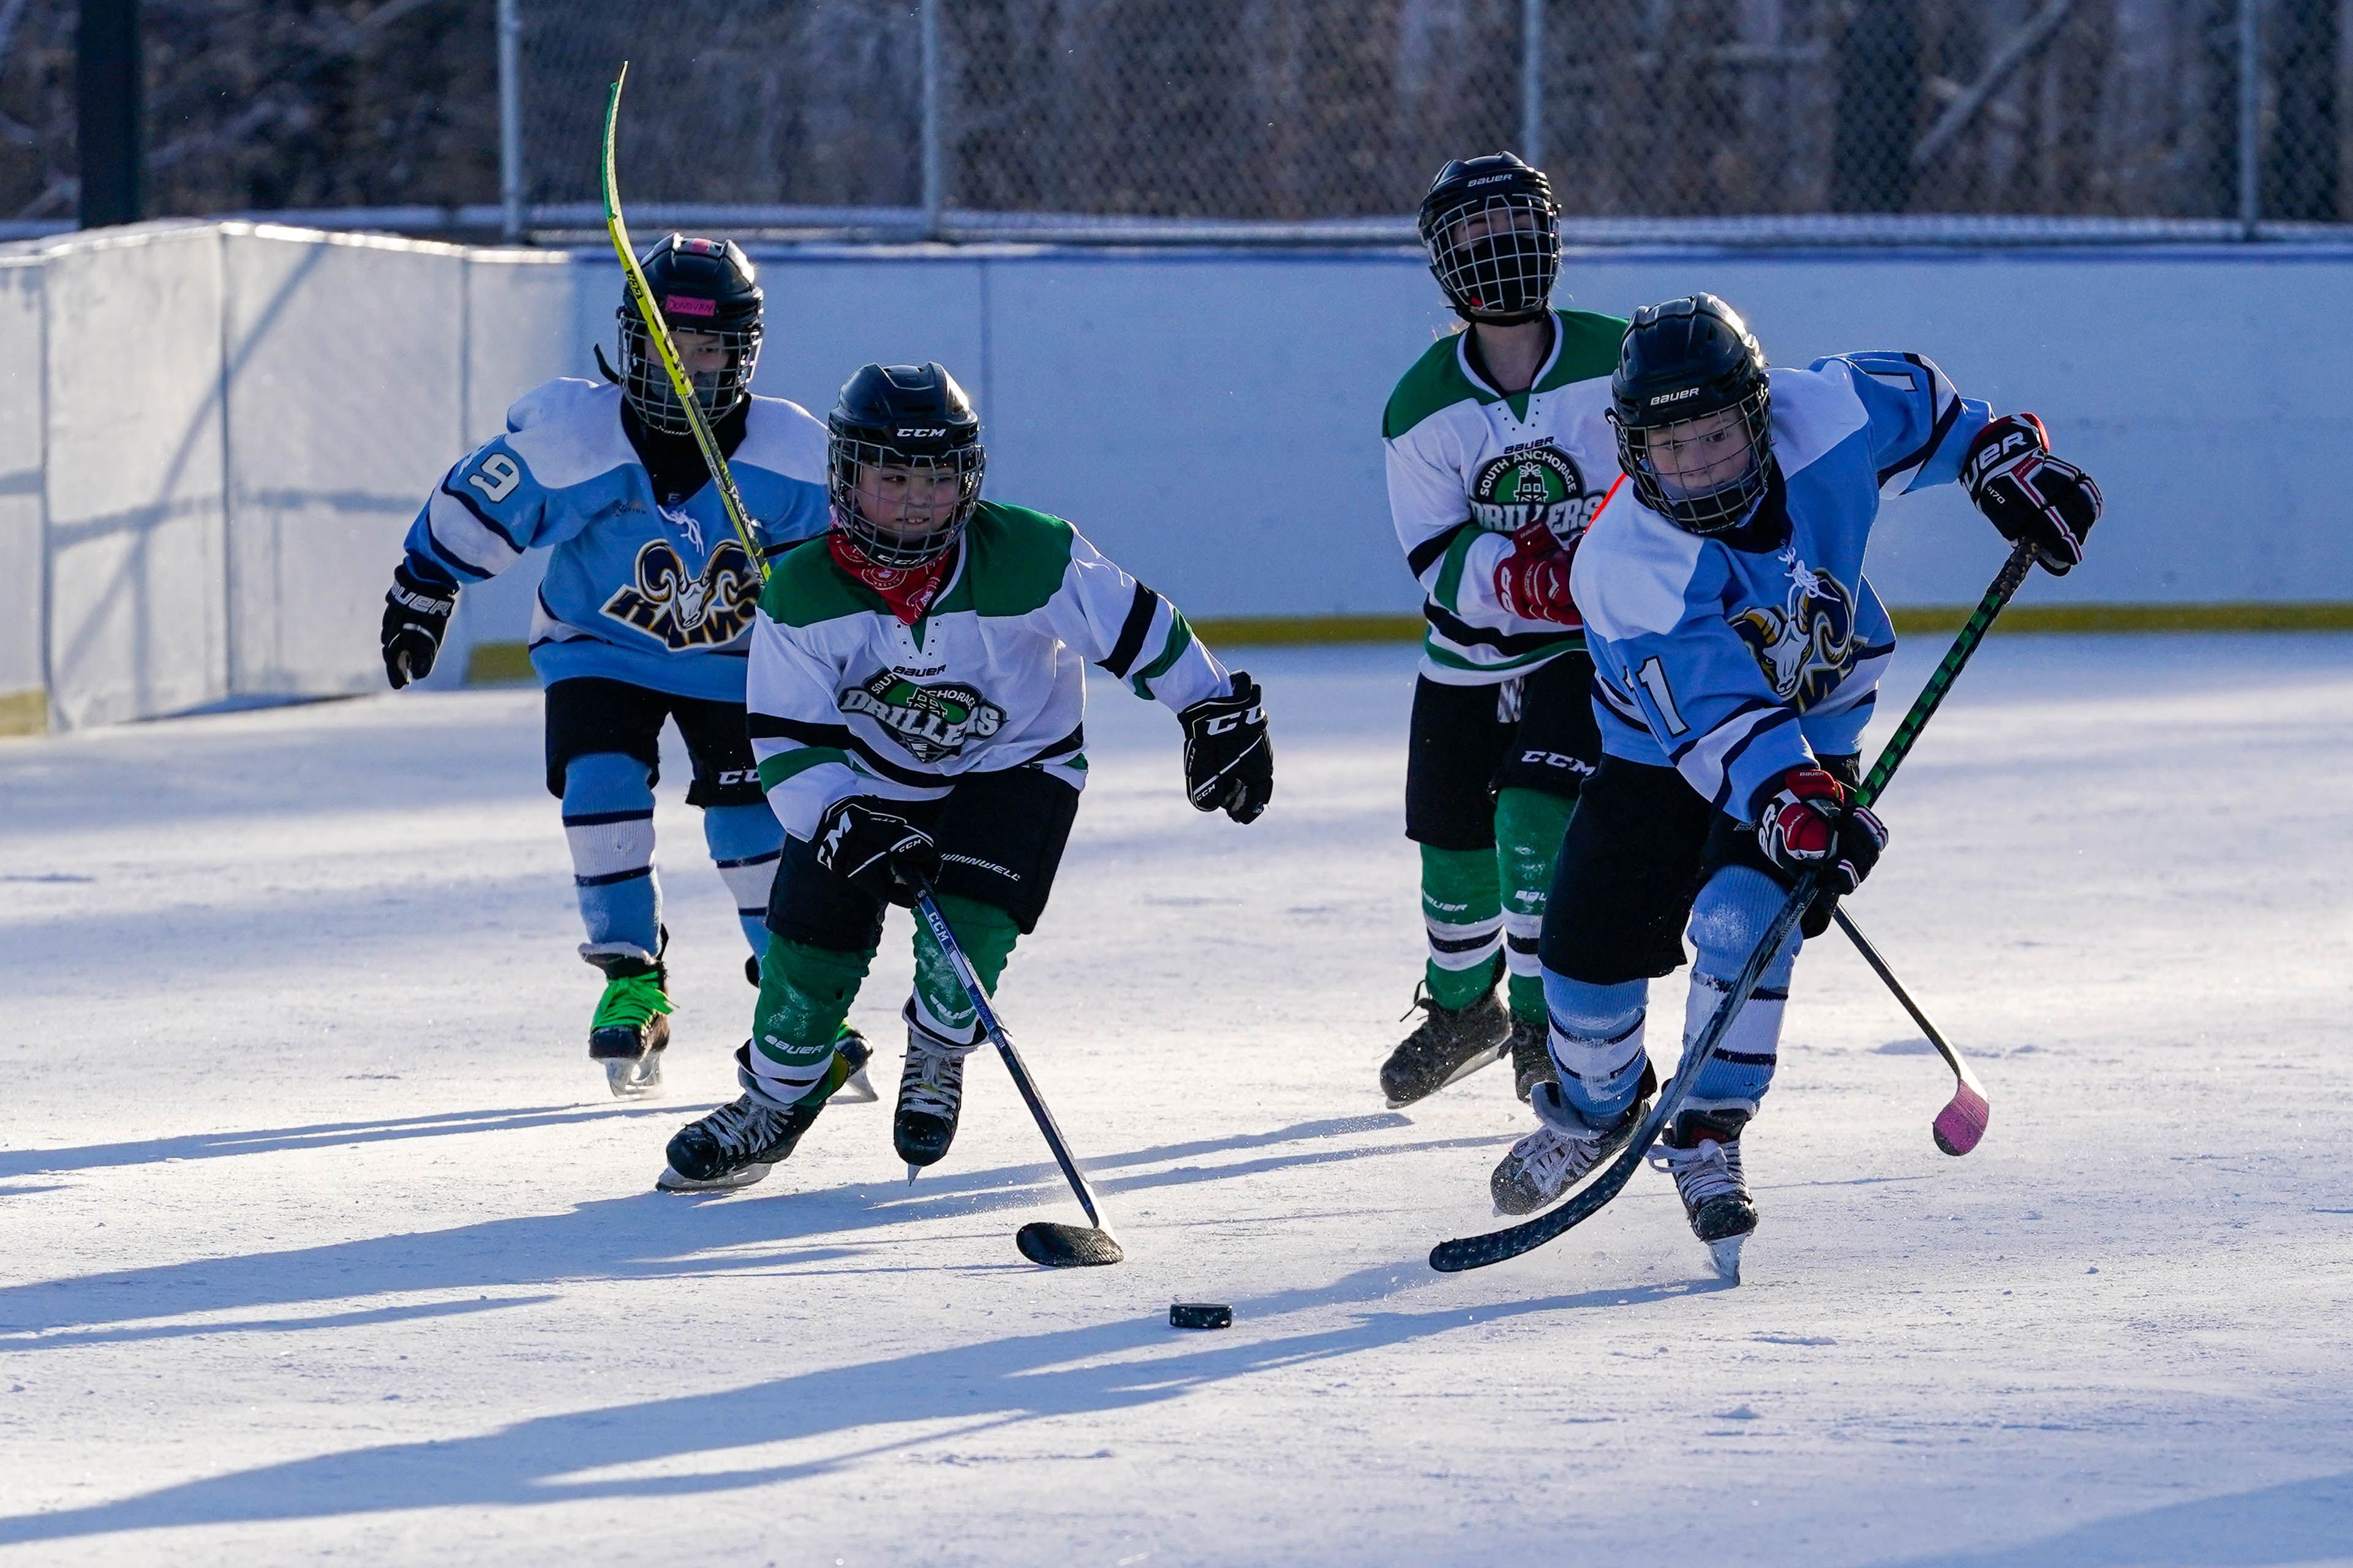 Hockey returns to the Bayshore Rink in South Anchorage